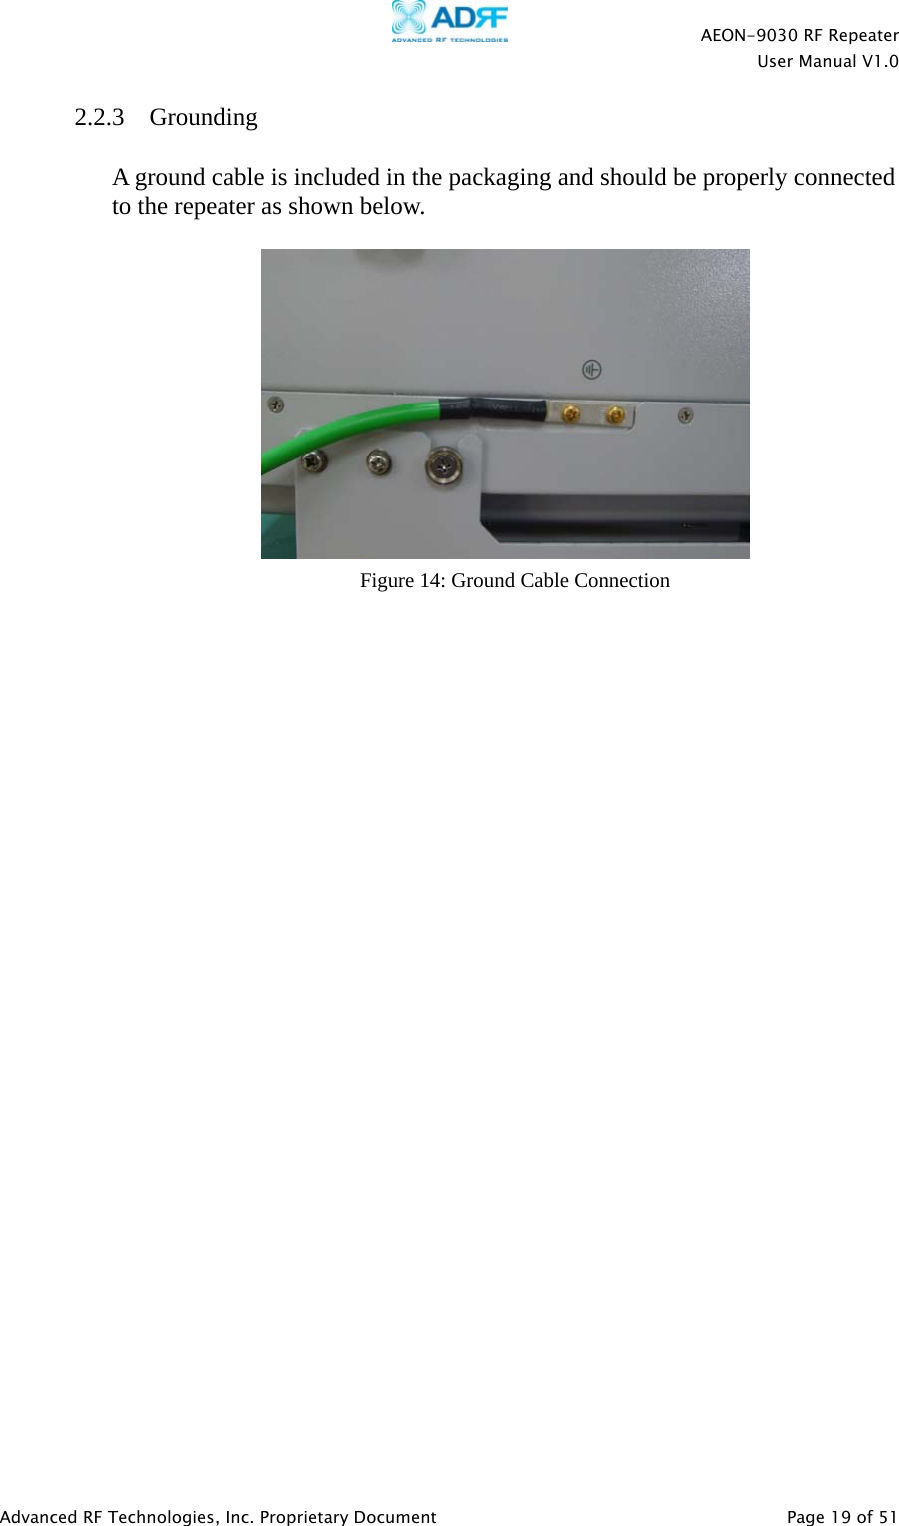    AEON-9030 RF Repeater  User Manual V1.0  Advanced RF Technologies, Inc. Proprietary Document   Page 19 of 51  2.2.3 Grounding  A ground cable is included in the packaging and should be properly connected to the repeater as shown below.    Figure 14: Ground Cable Connection 